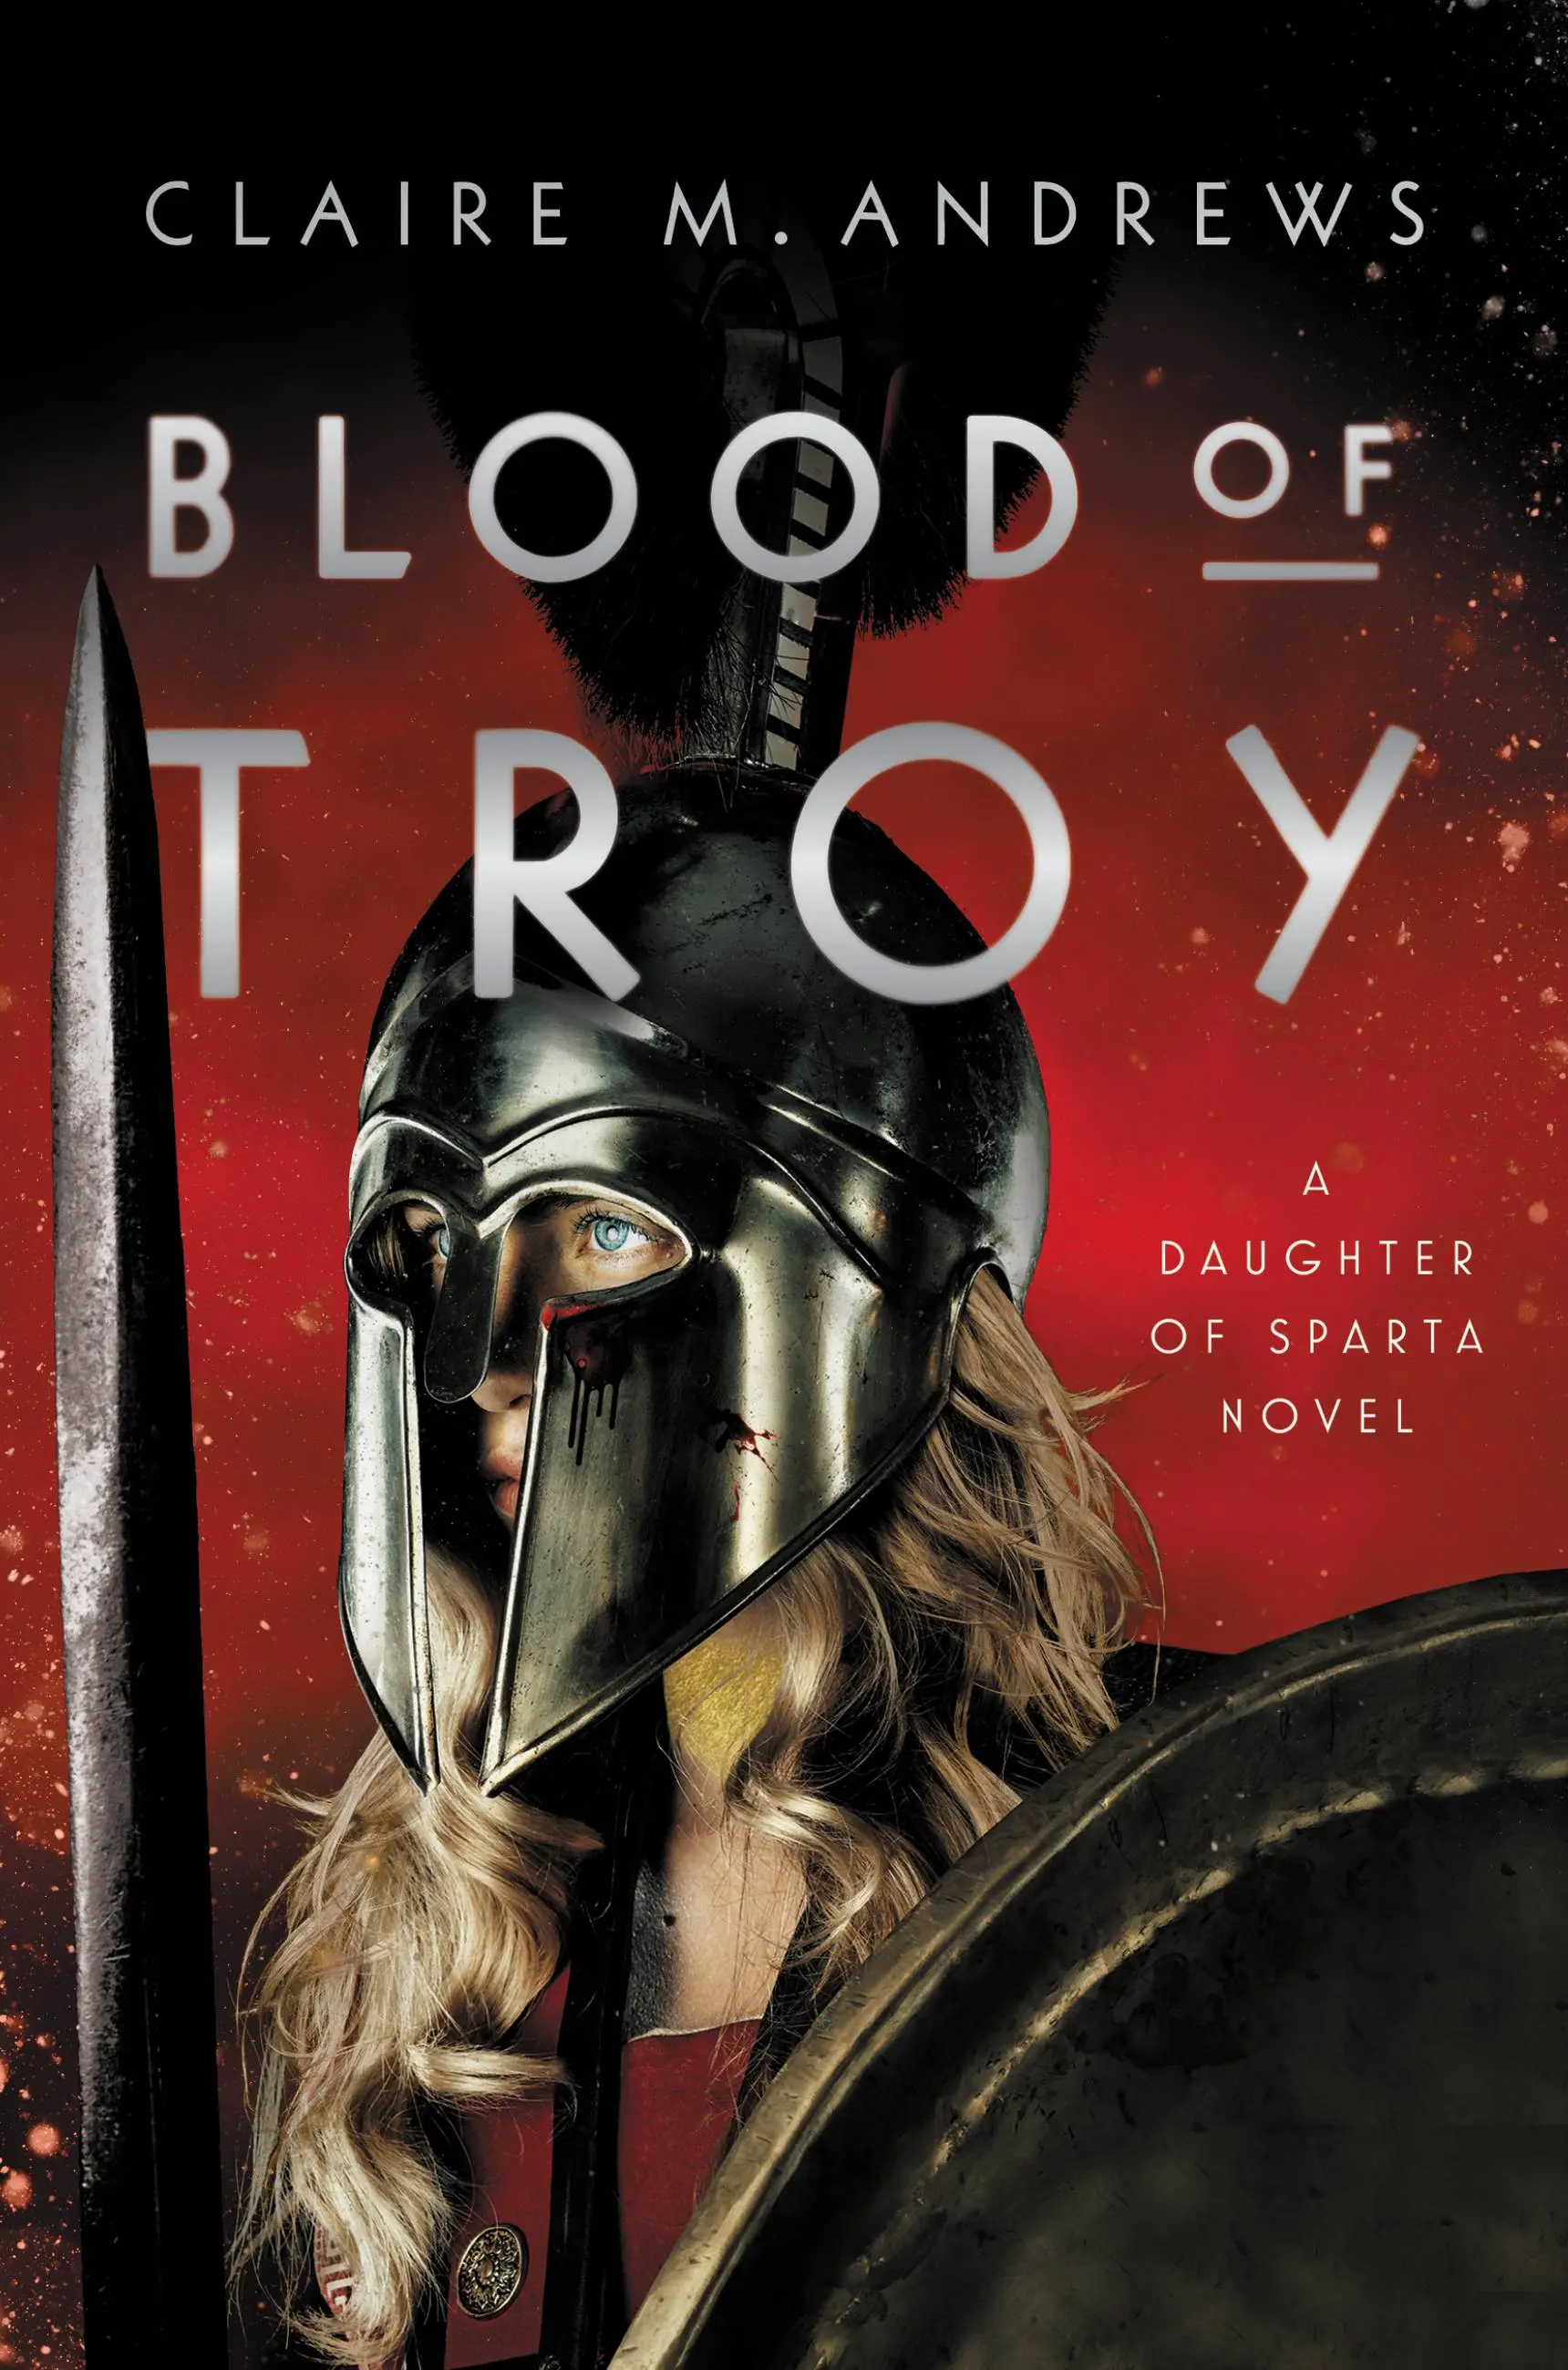 Image for "Blood of Troy"